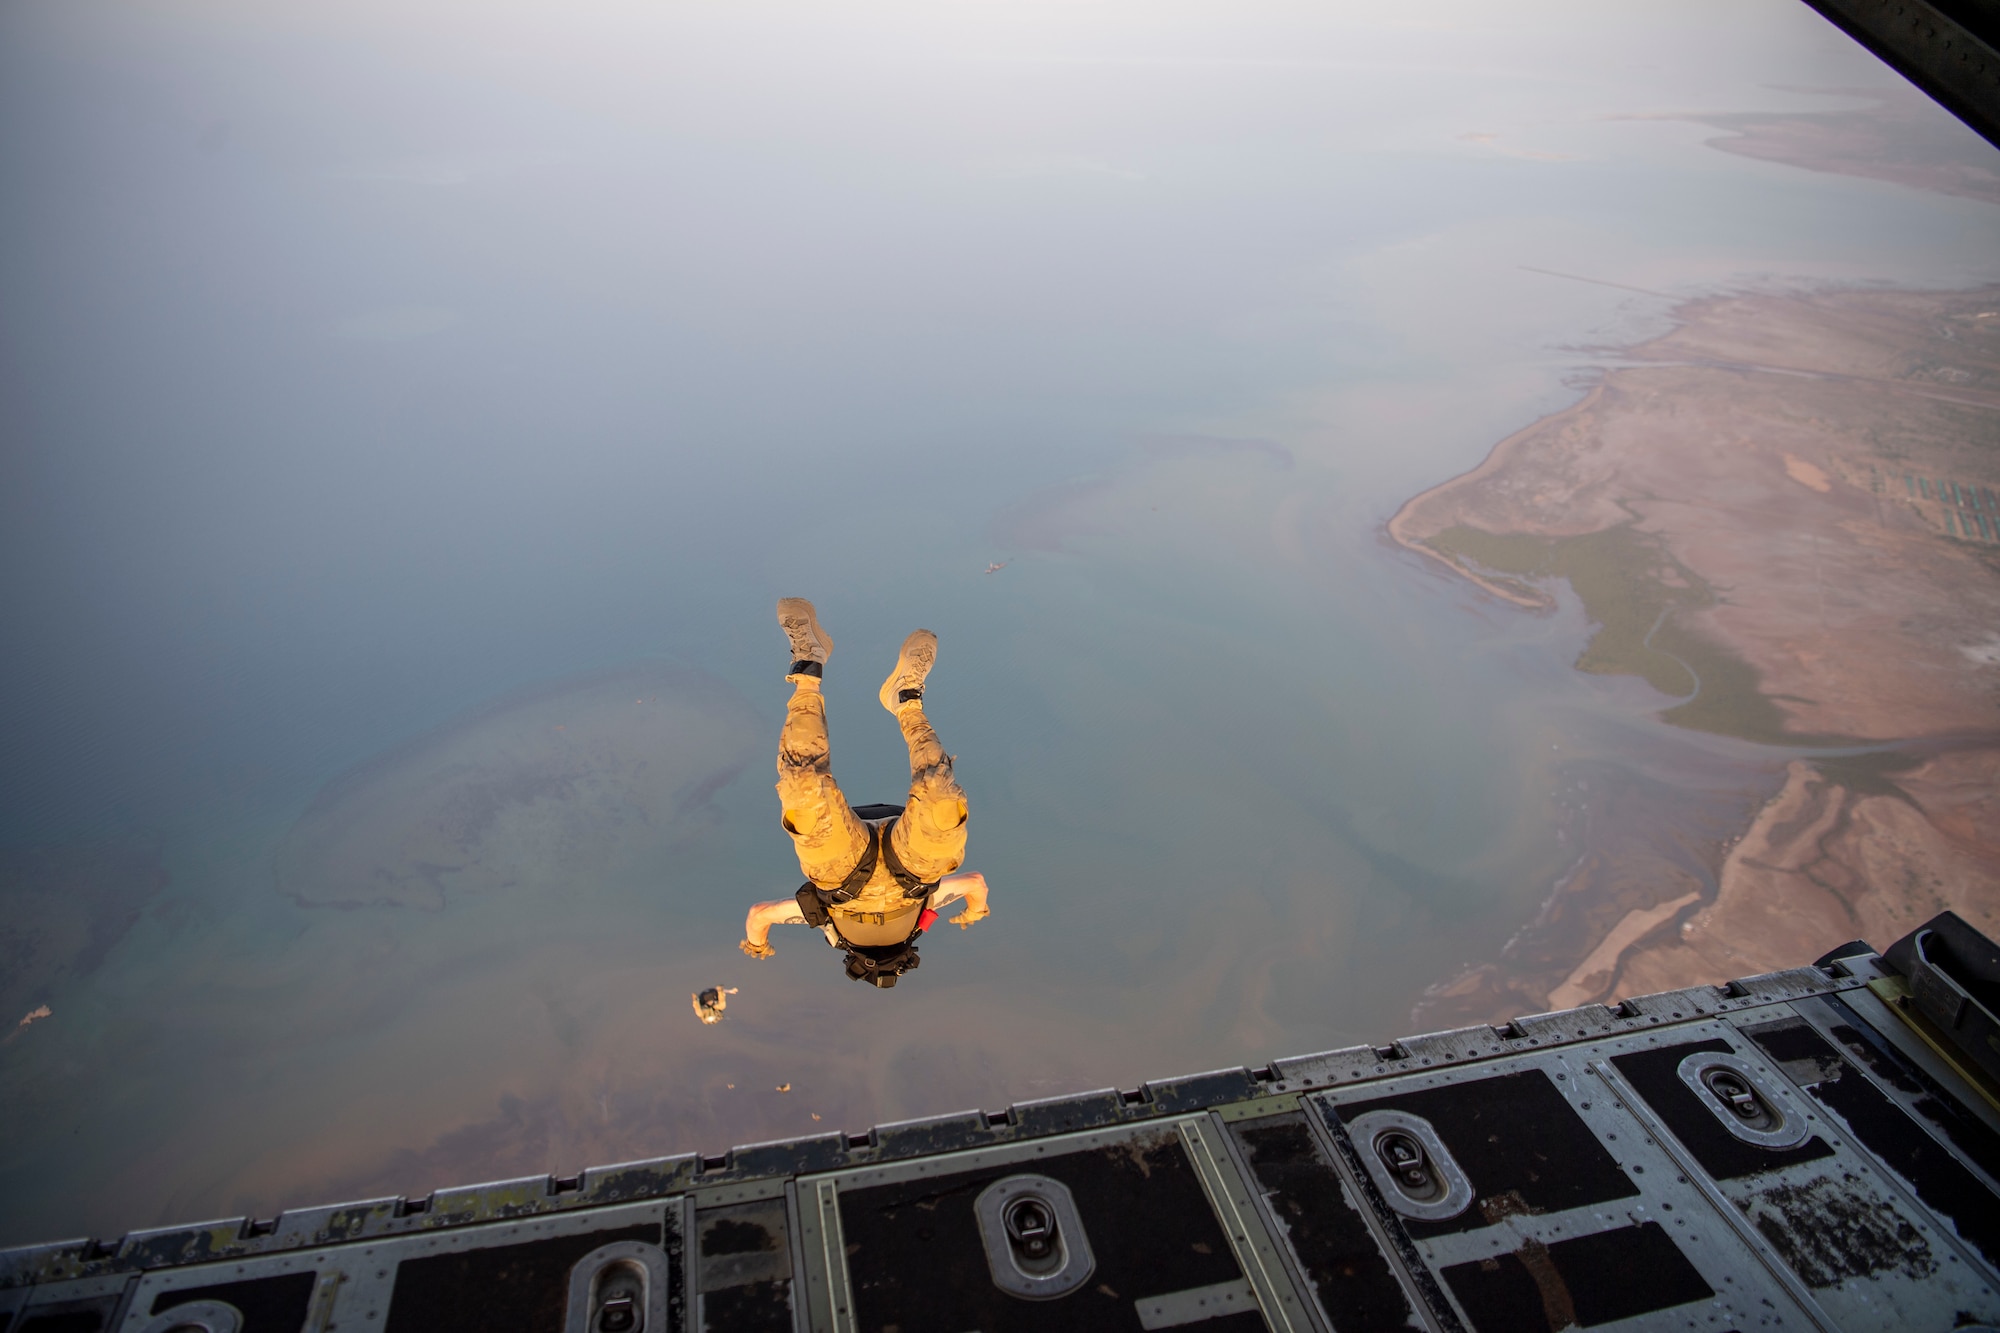 A person jumps from an airplane